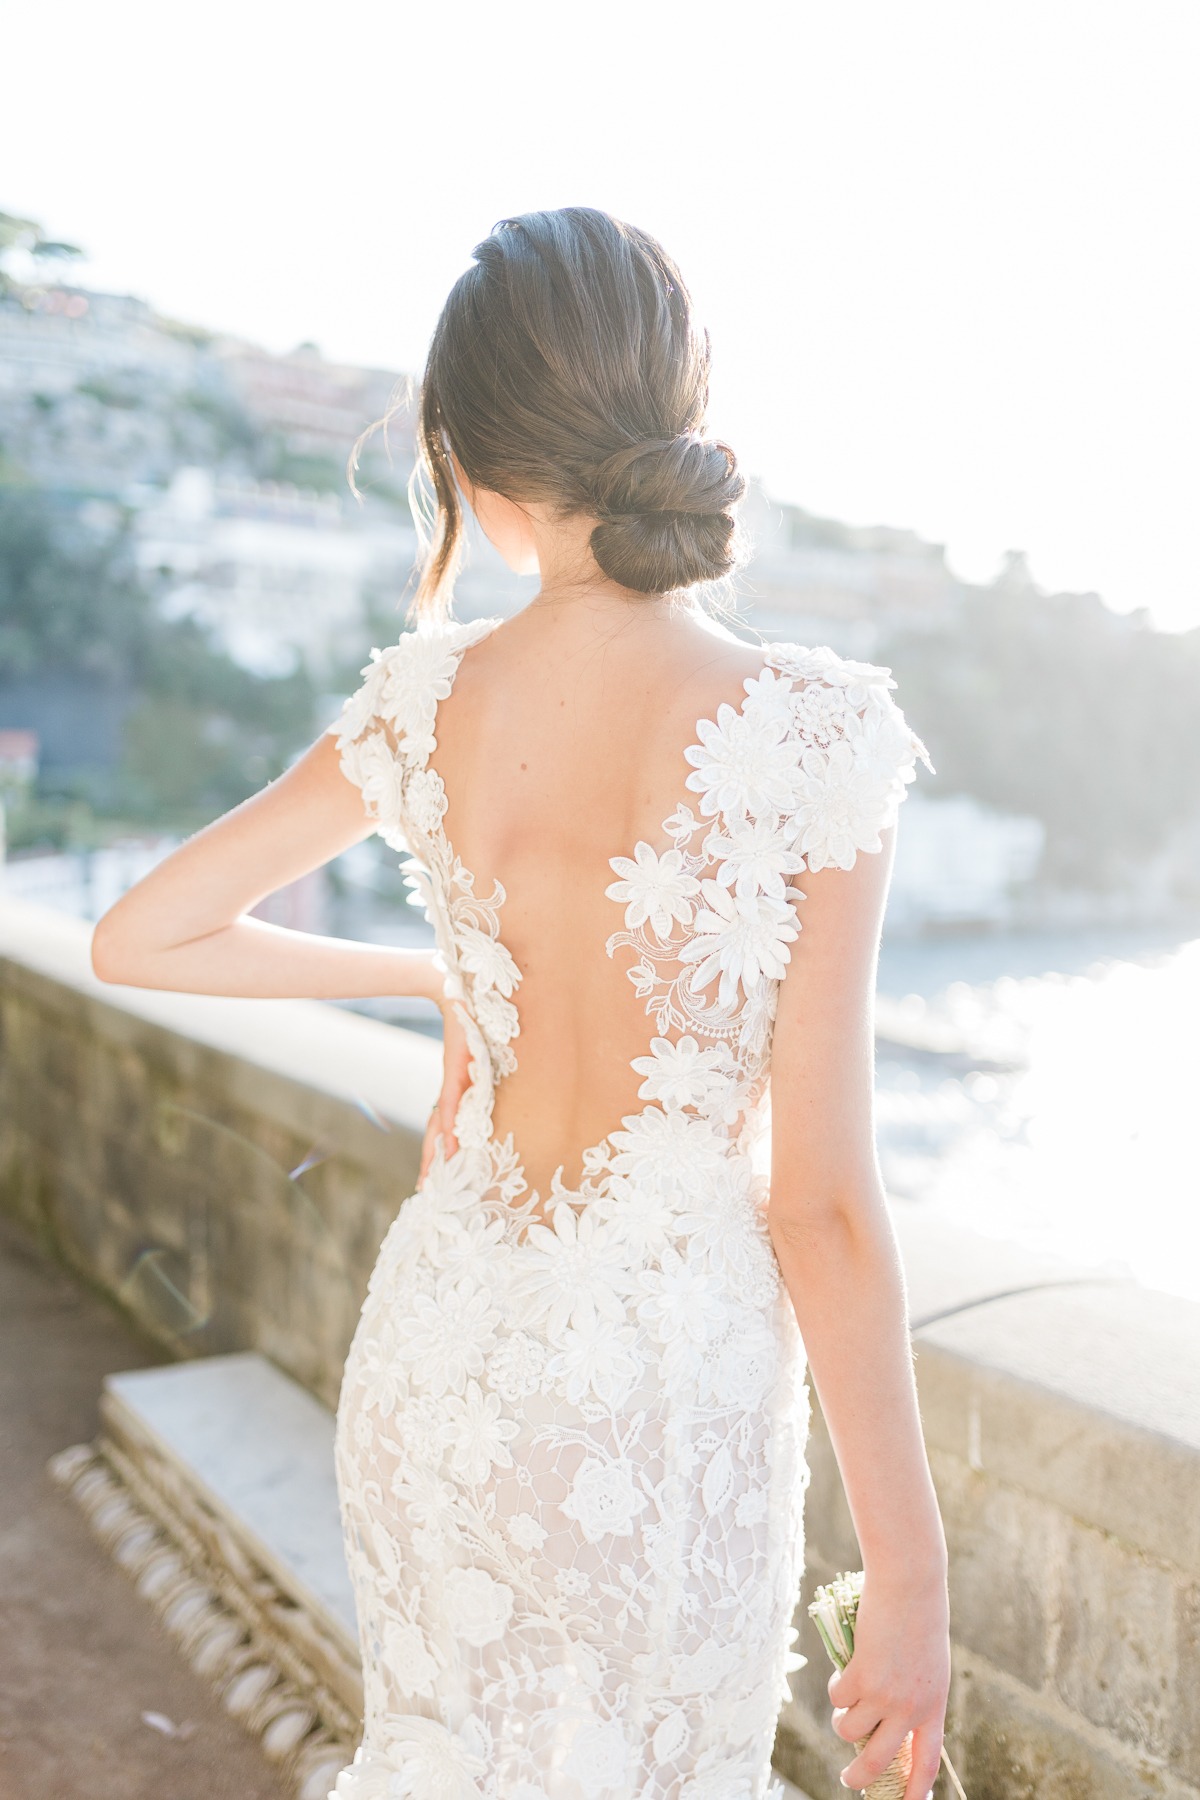 Romantic Italian Wedding Inspiration With A Breathtaking View